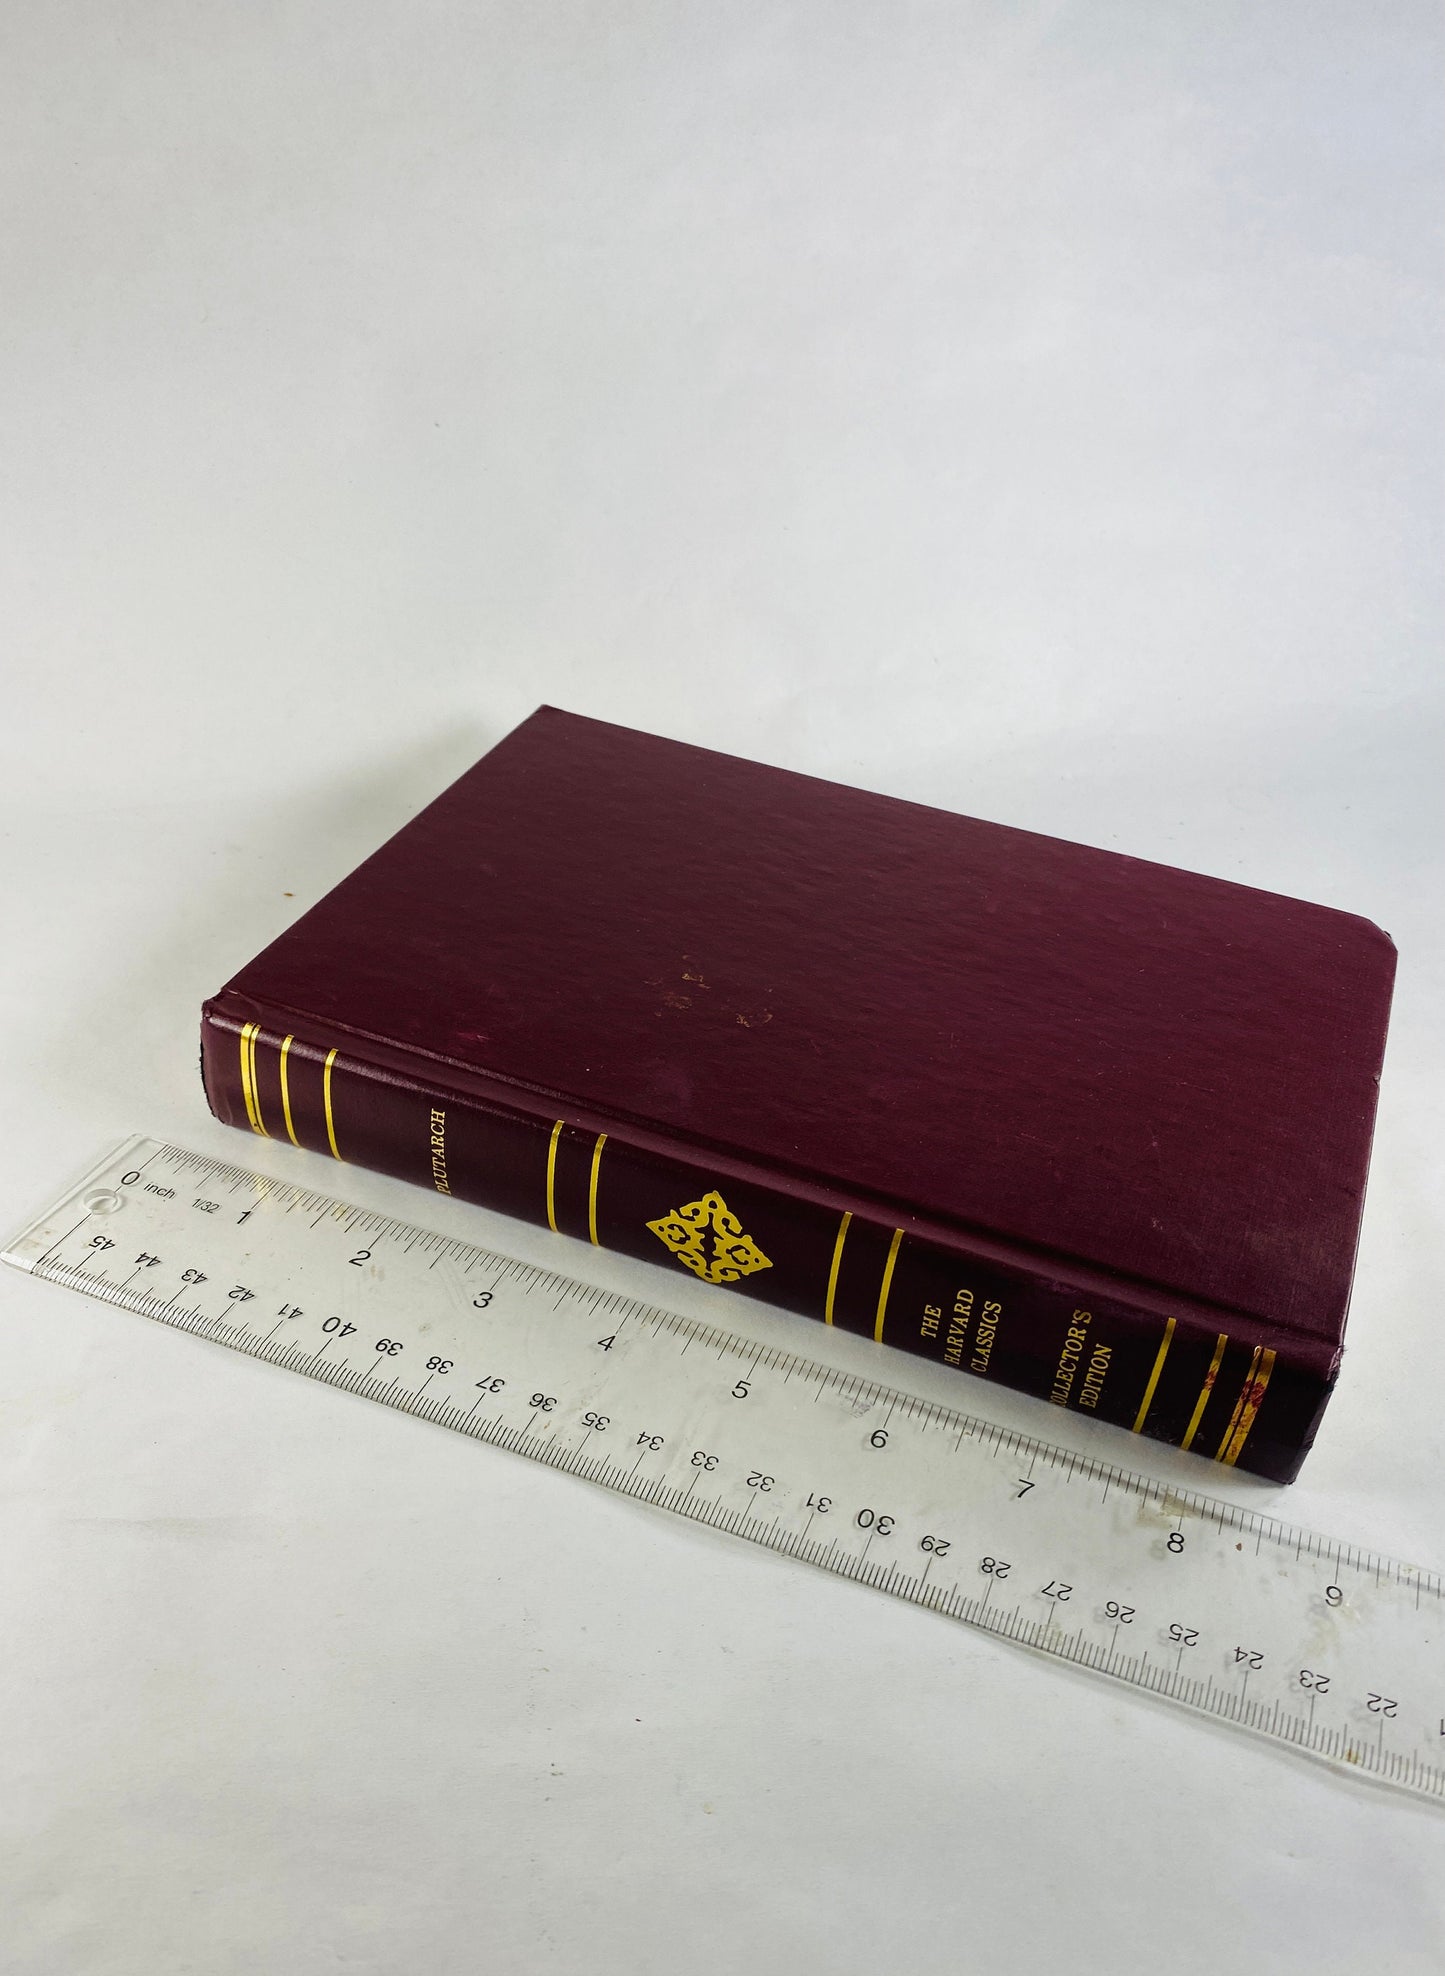 Plutarch's Lives vintage Harvard Classics book philosophy maroon red with 22kt gold gilded lettering gift Pericles Aristides Demosthenes